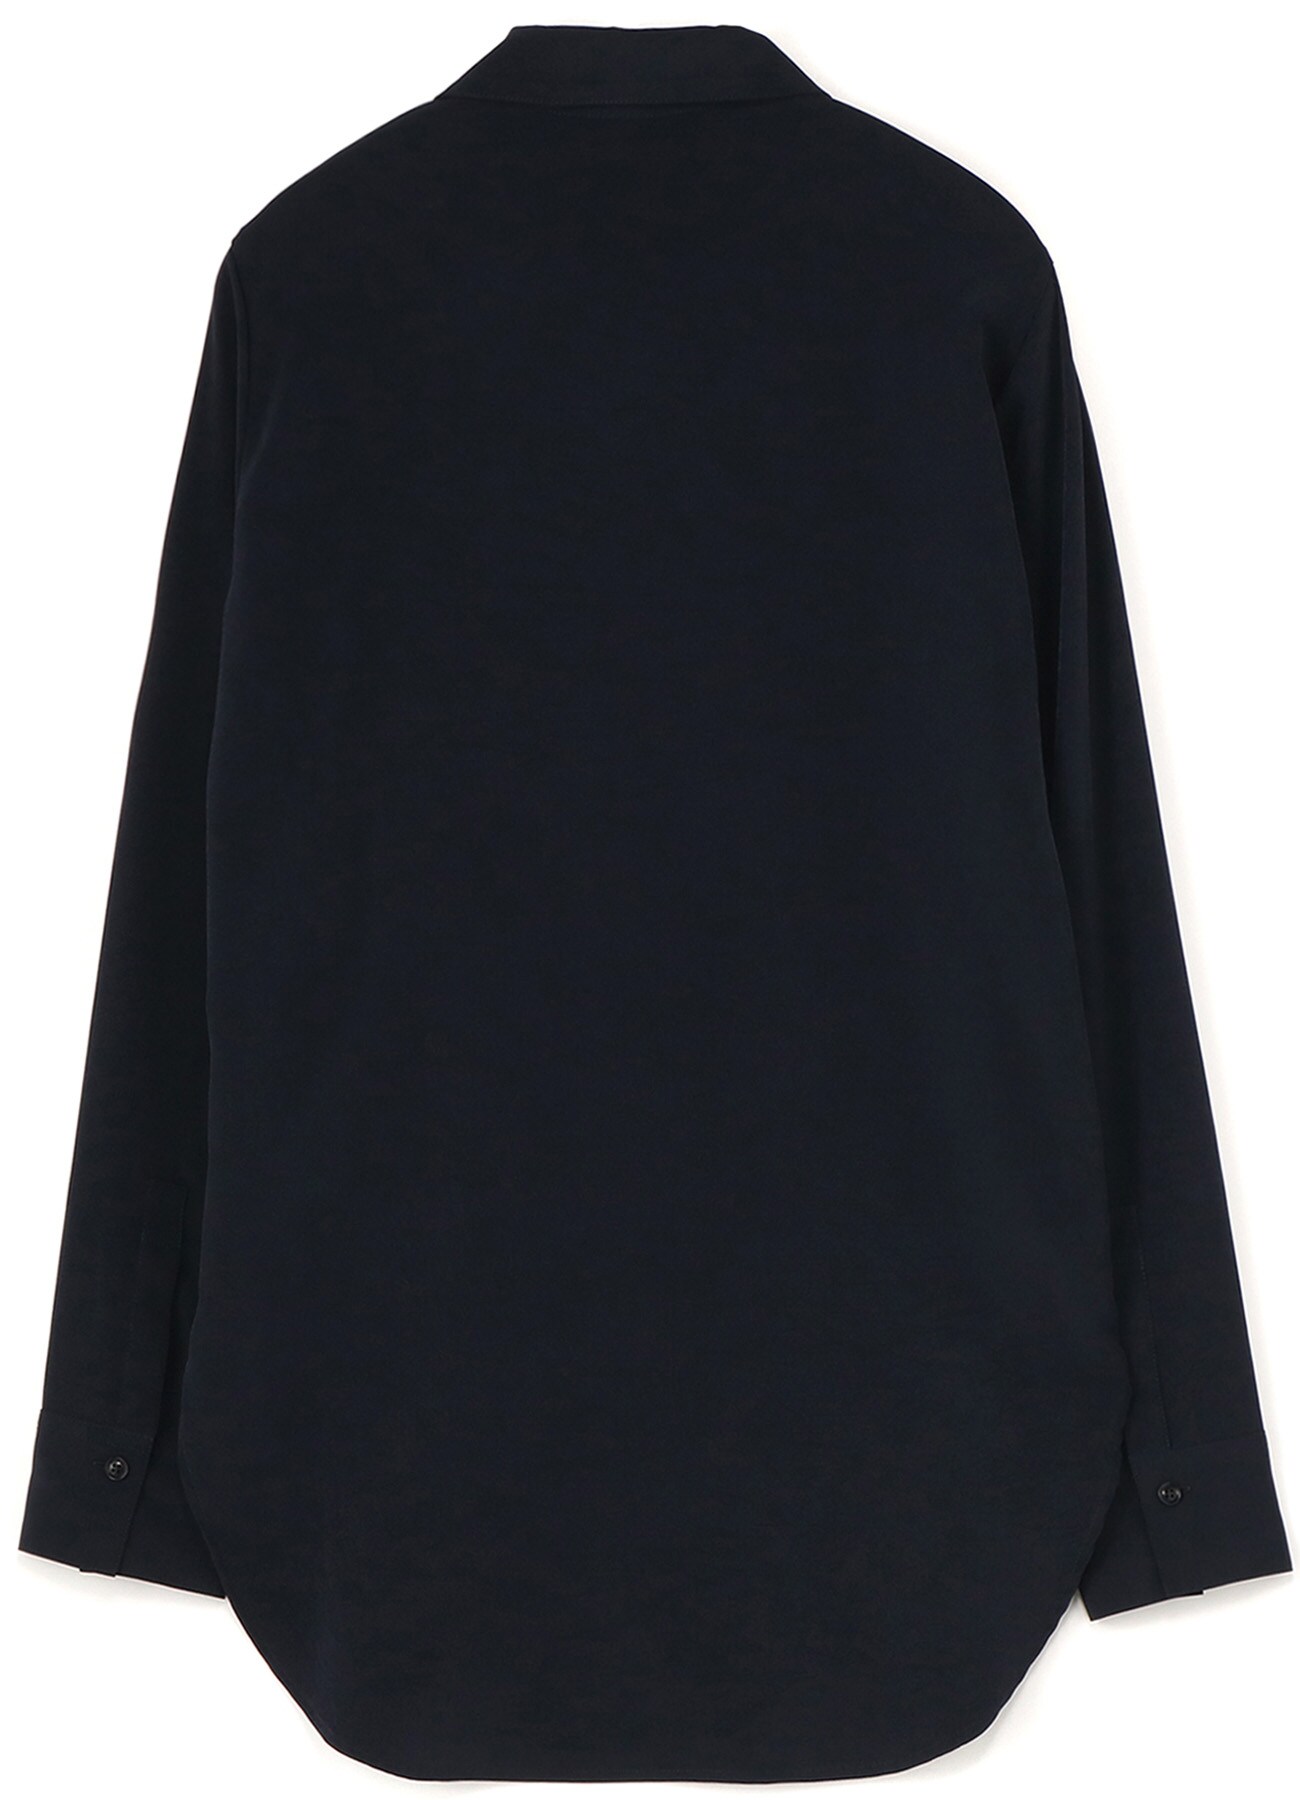 DECYNE FRONT OPEN SQUARE BLOUSE